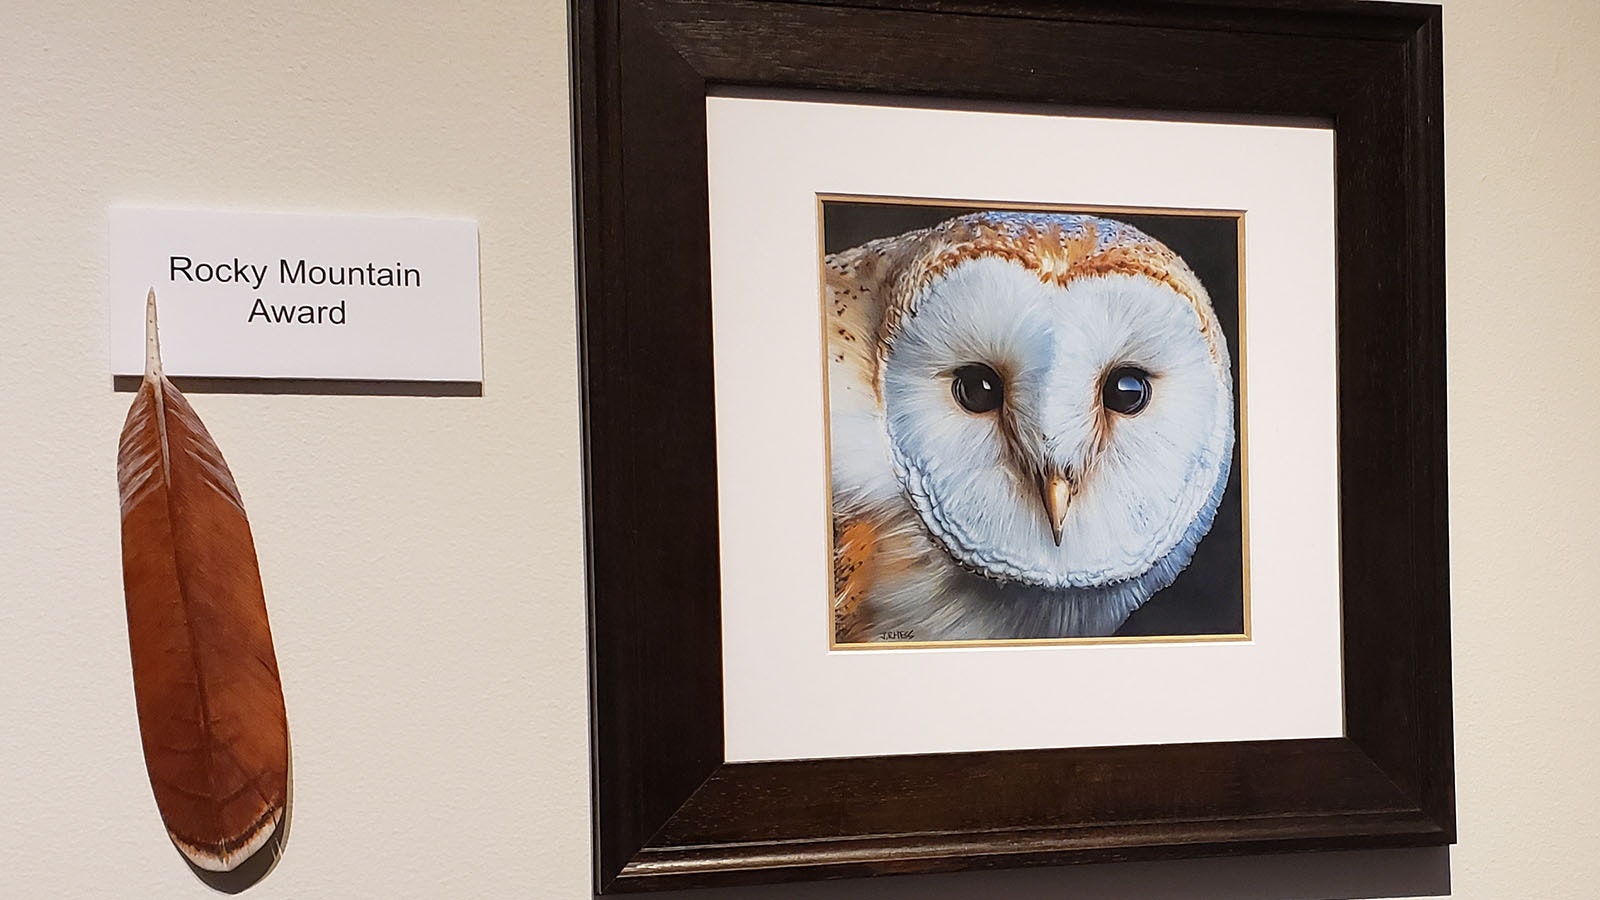 This barn owl received the Rocky Mountain Award at the "Birds of the Rockies" show at the Brinton Museum in Big Horn.